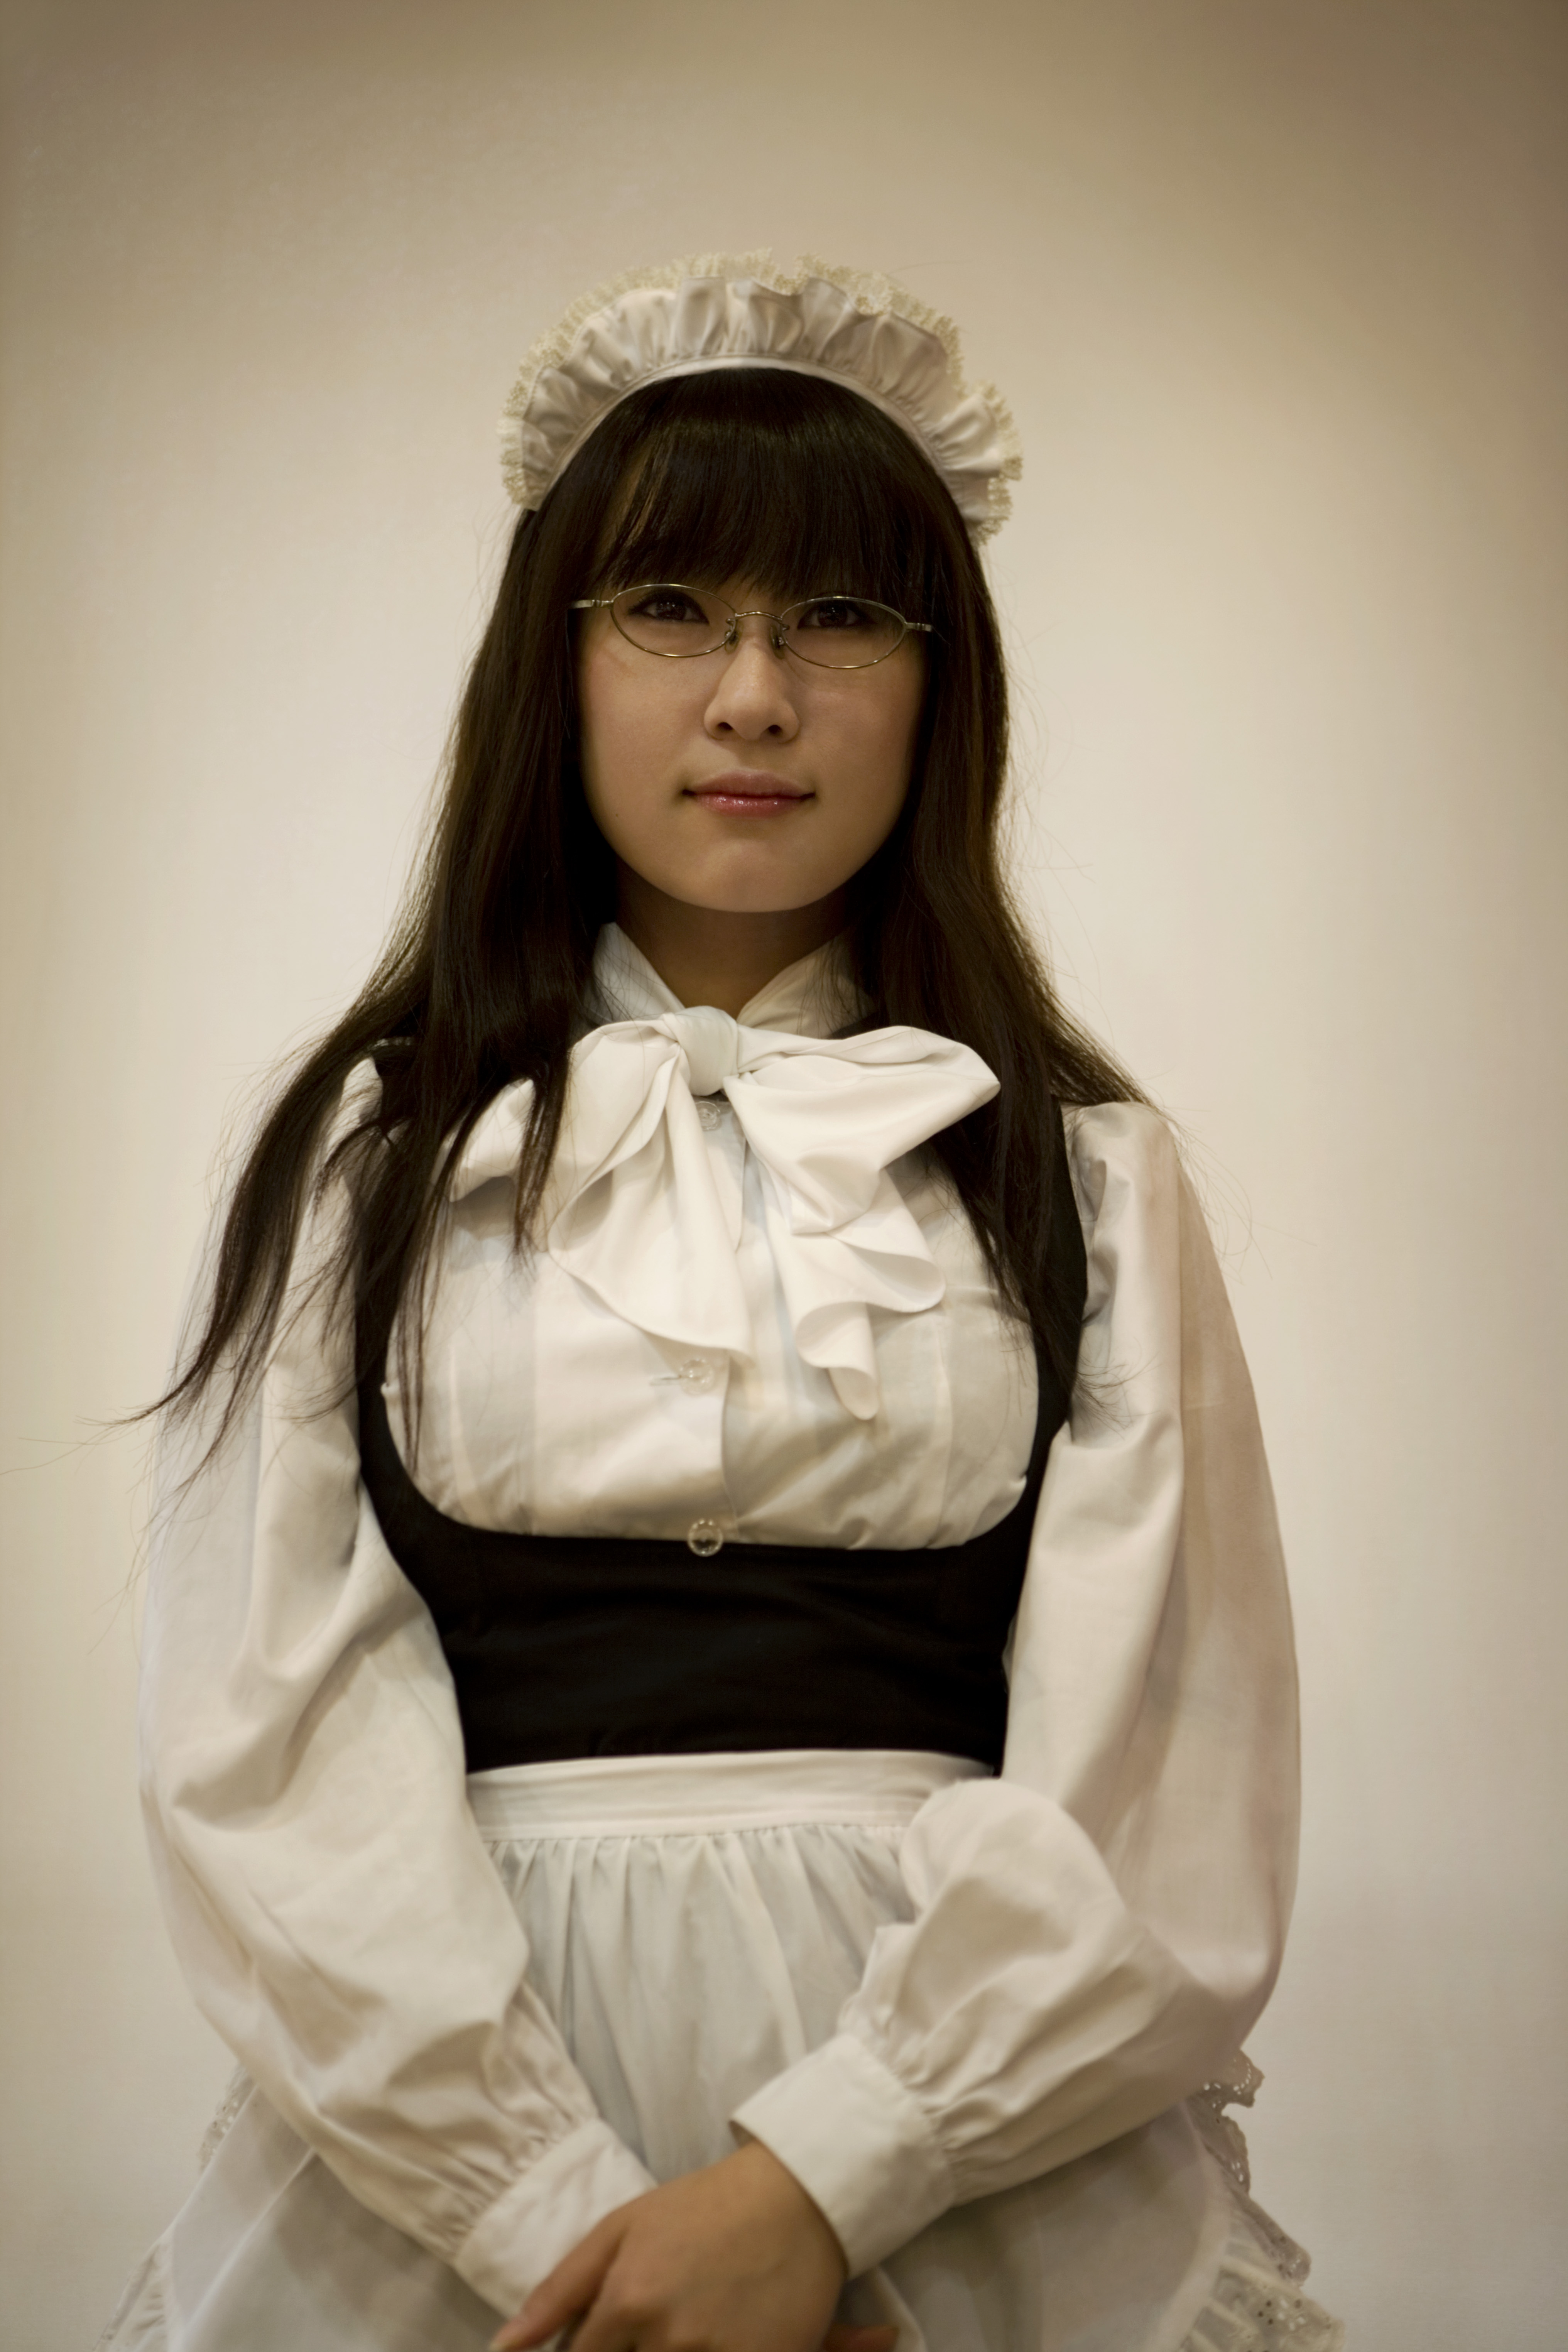 Female figure in traditional Japanese maids uniform. The photograph was included in the exhibition Alice Hawkins: All The World is A Stage.